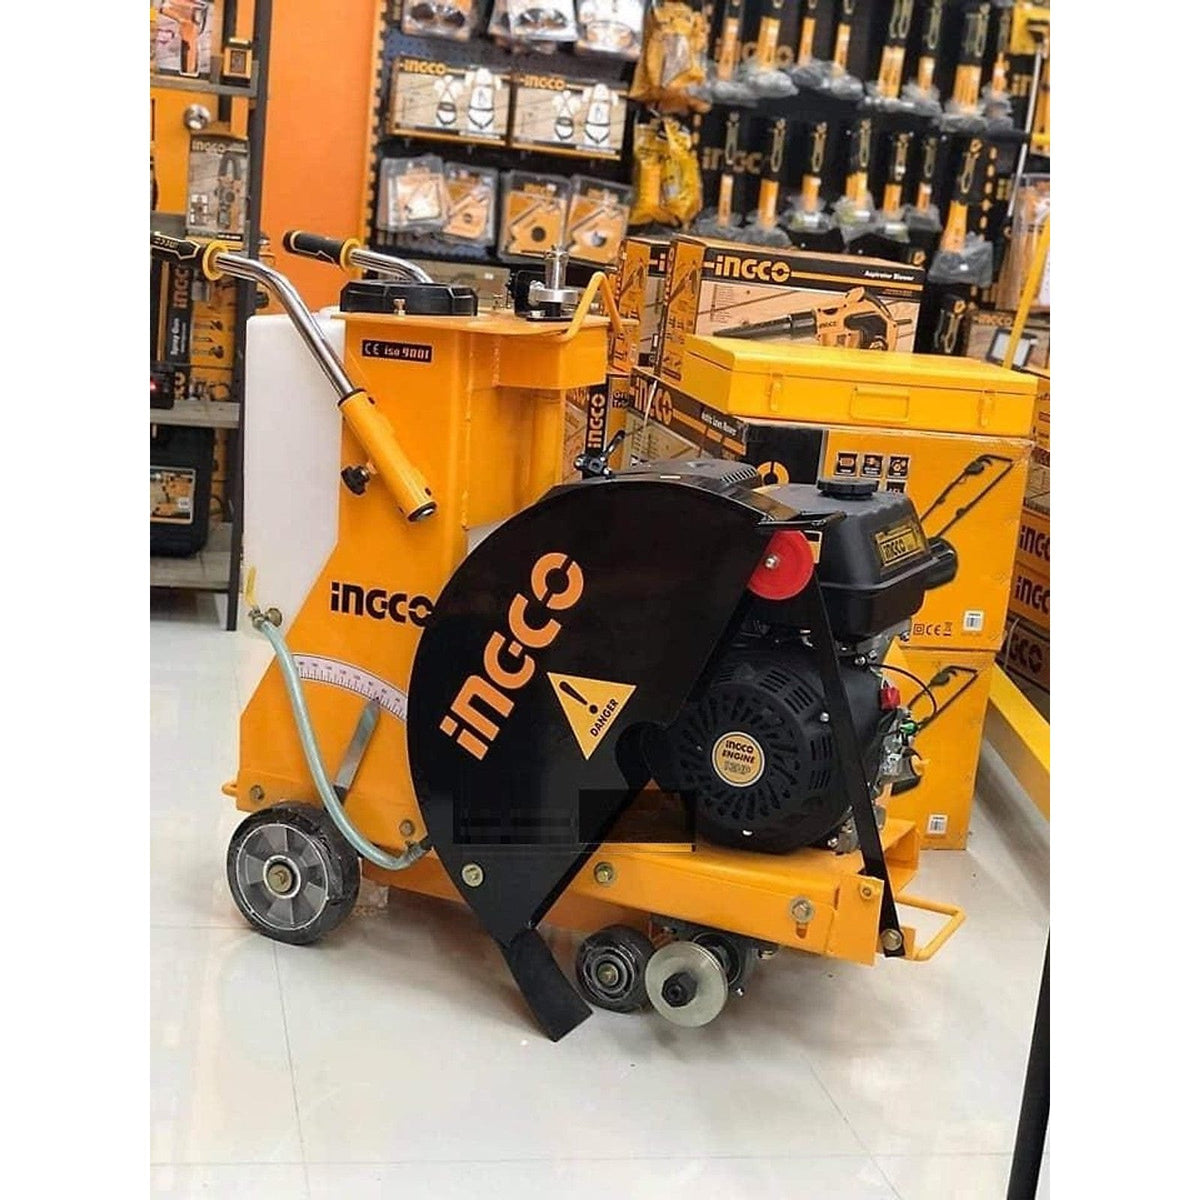 Ingco Gasoline Floor saw 9.6 KW - GSF16-2 | Supply Master | Accra, Ghana Construction Equipment Buy Tools hardware Building materials